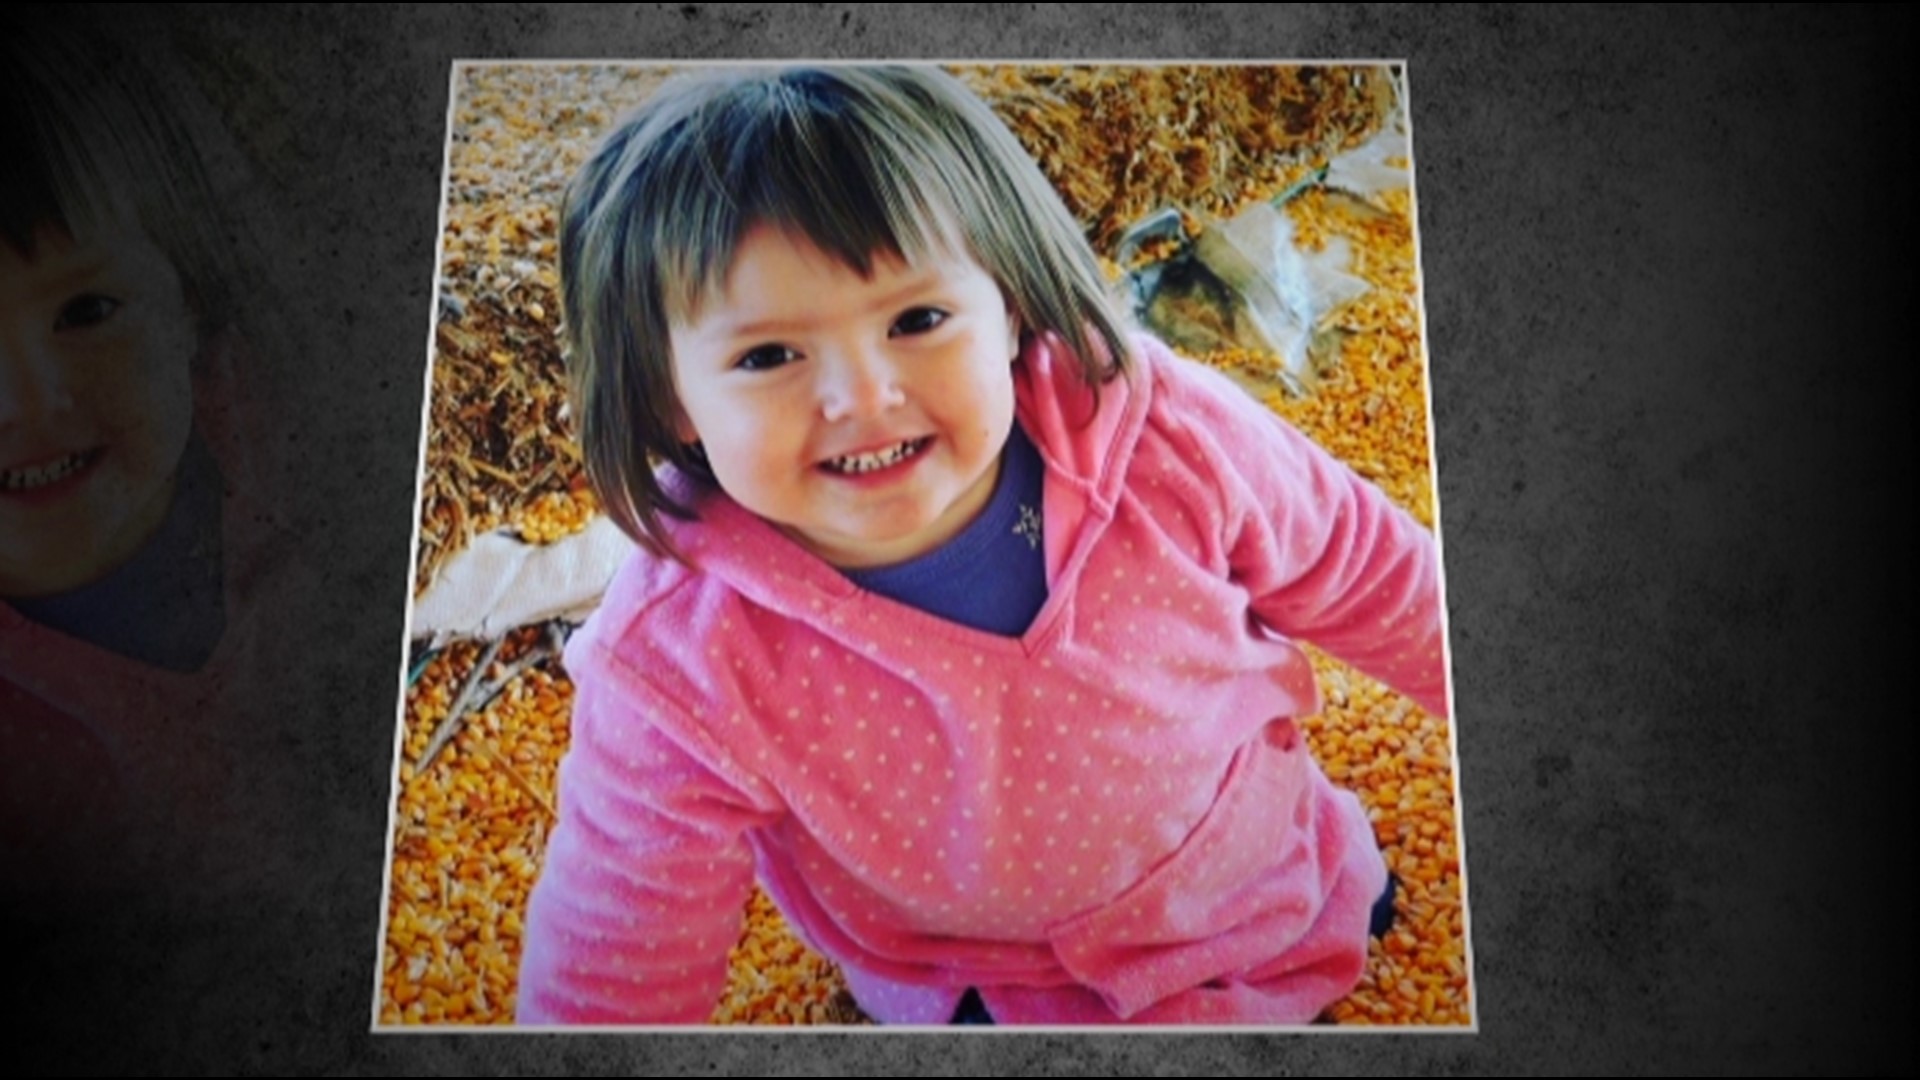 Hennepin County reached a settlement with the family of a 3-year-old girl murdered in foster care. But Arianna Hunziker’s family is seeking more accountability.